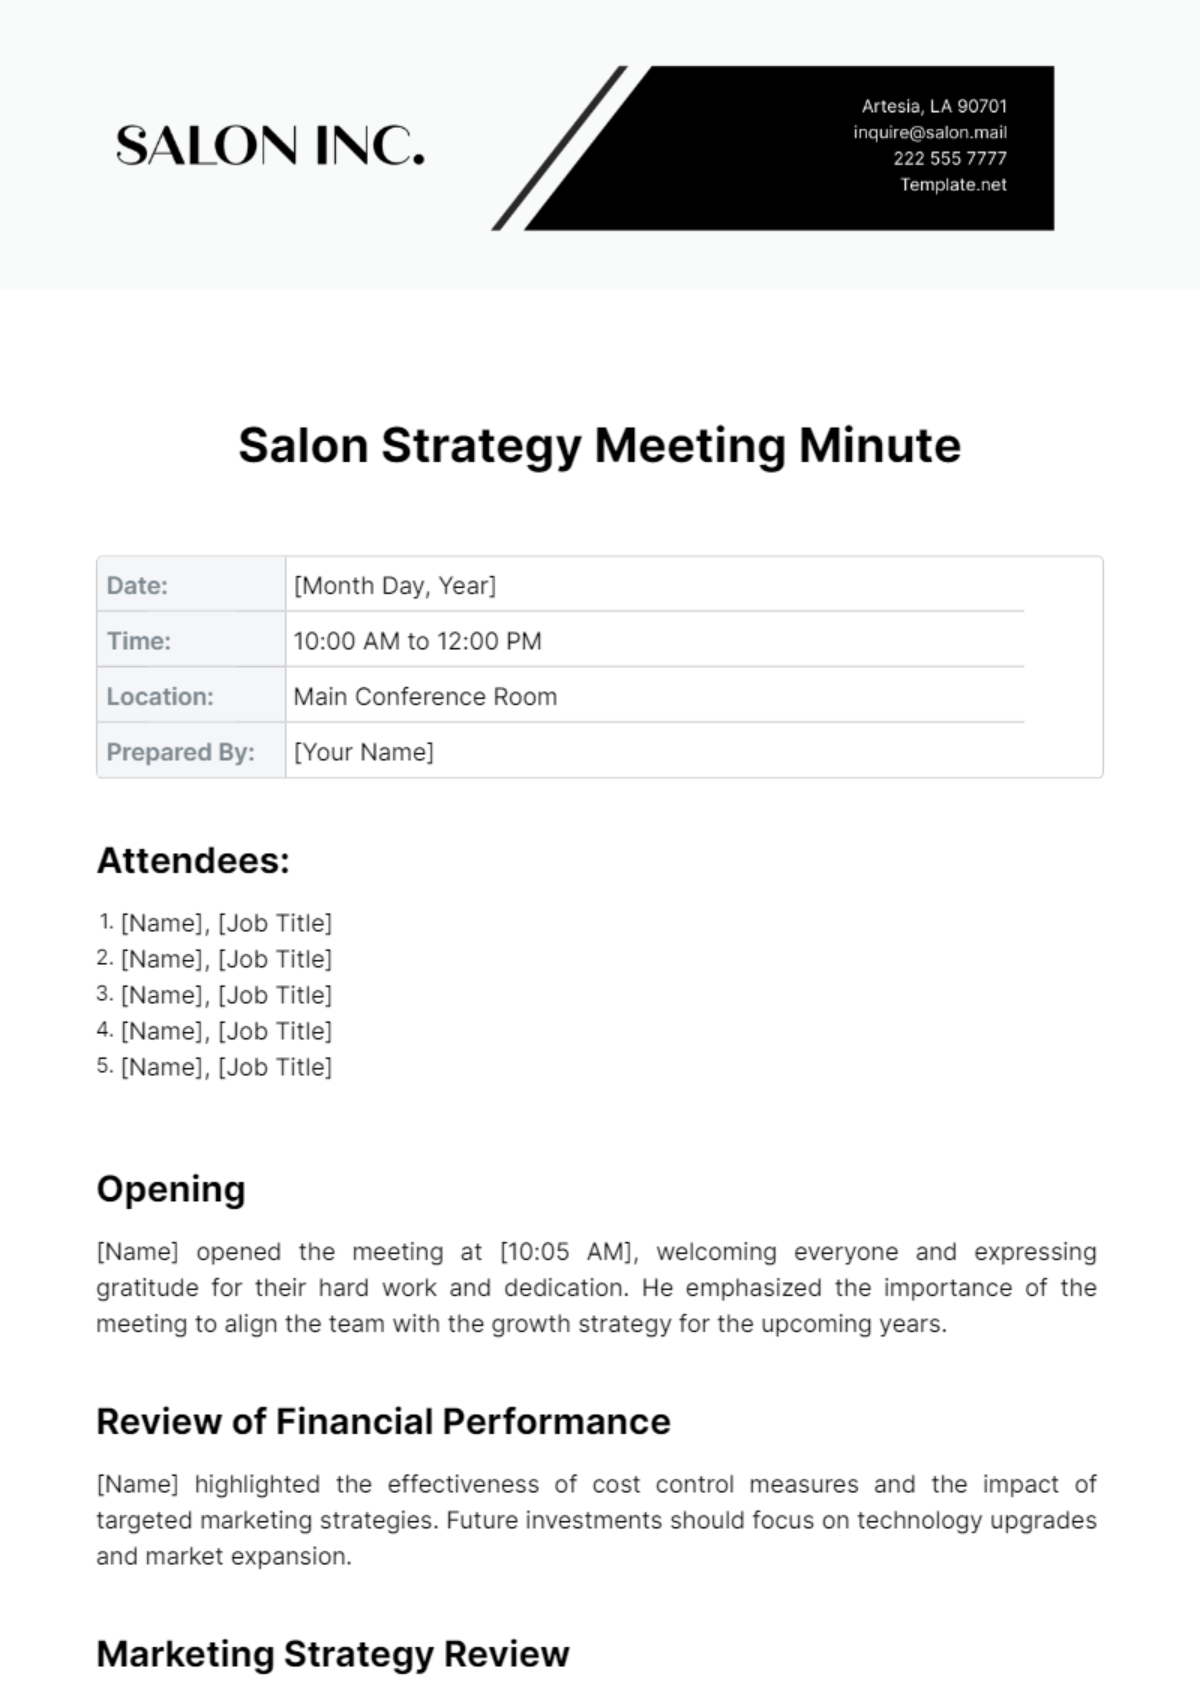 Free Salon Strategy Meeting Minute Template